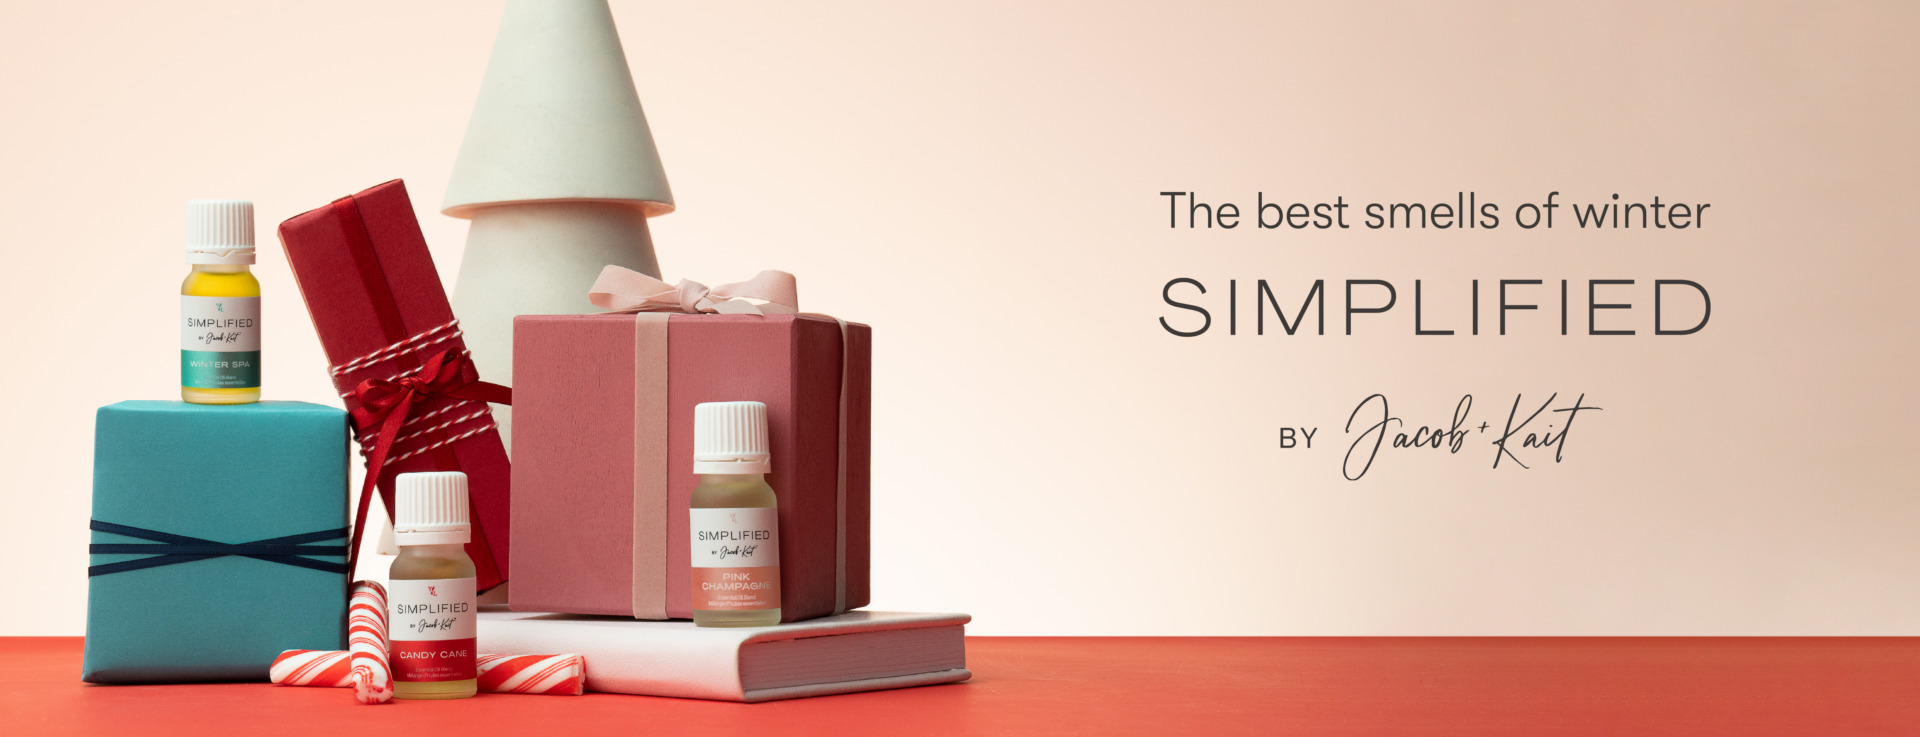 The best smells of winter—simplified